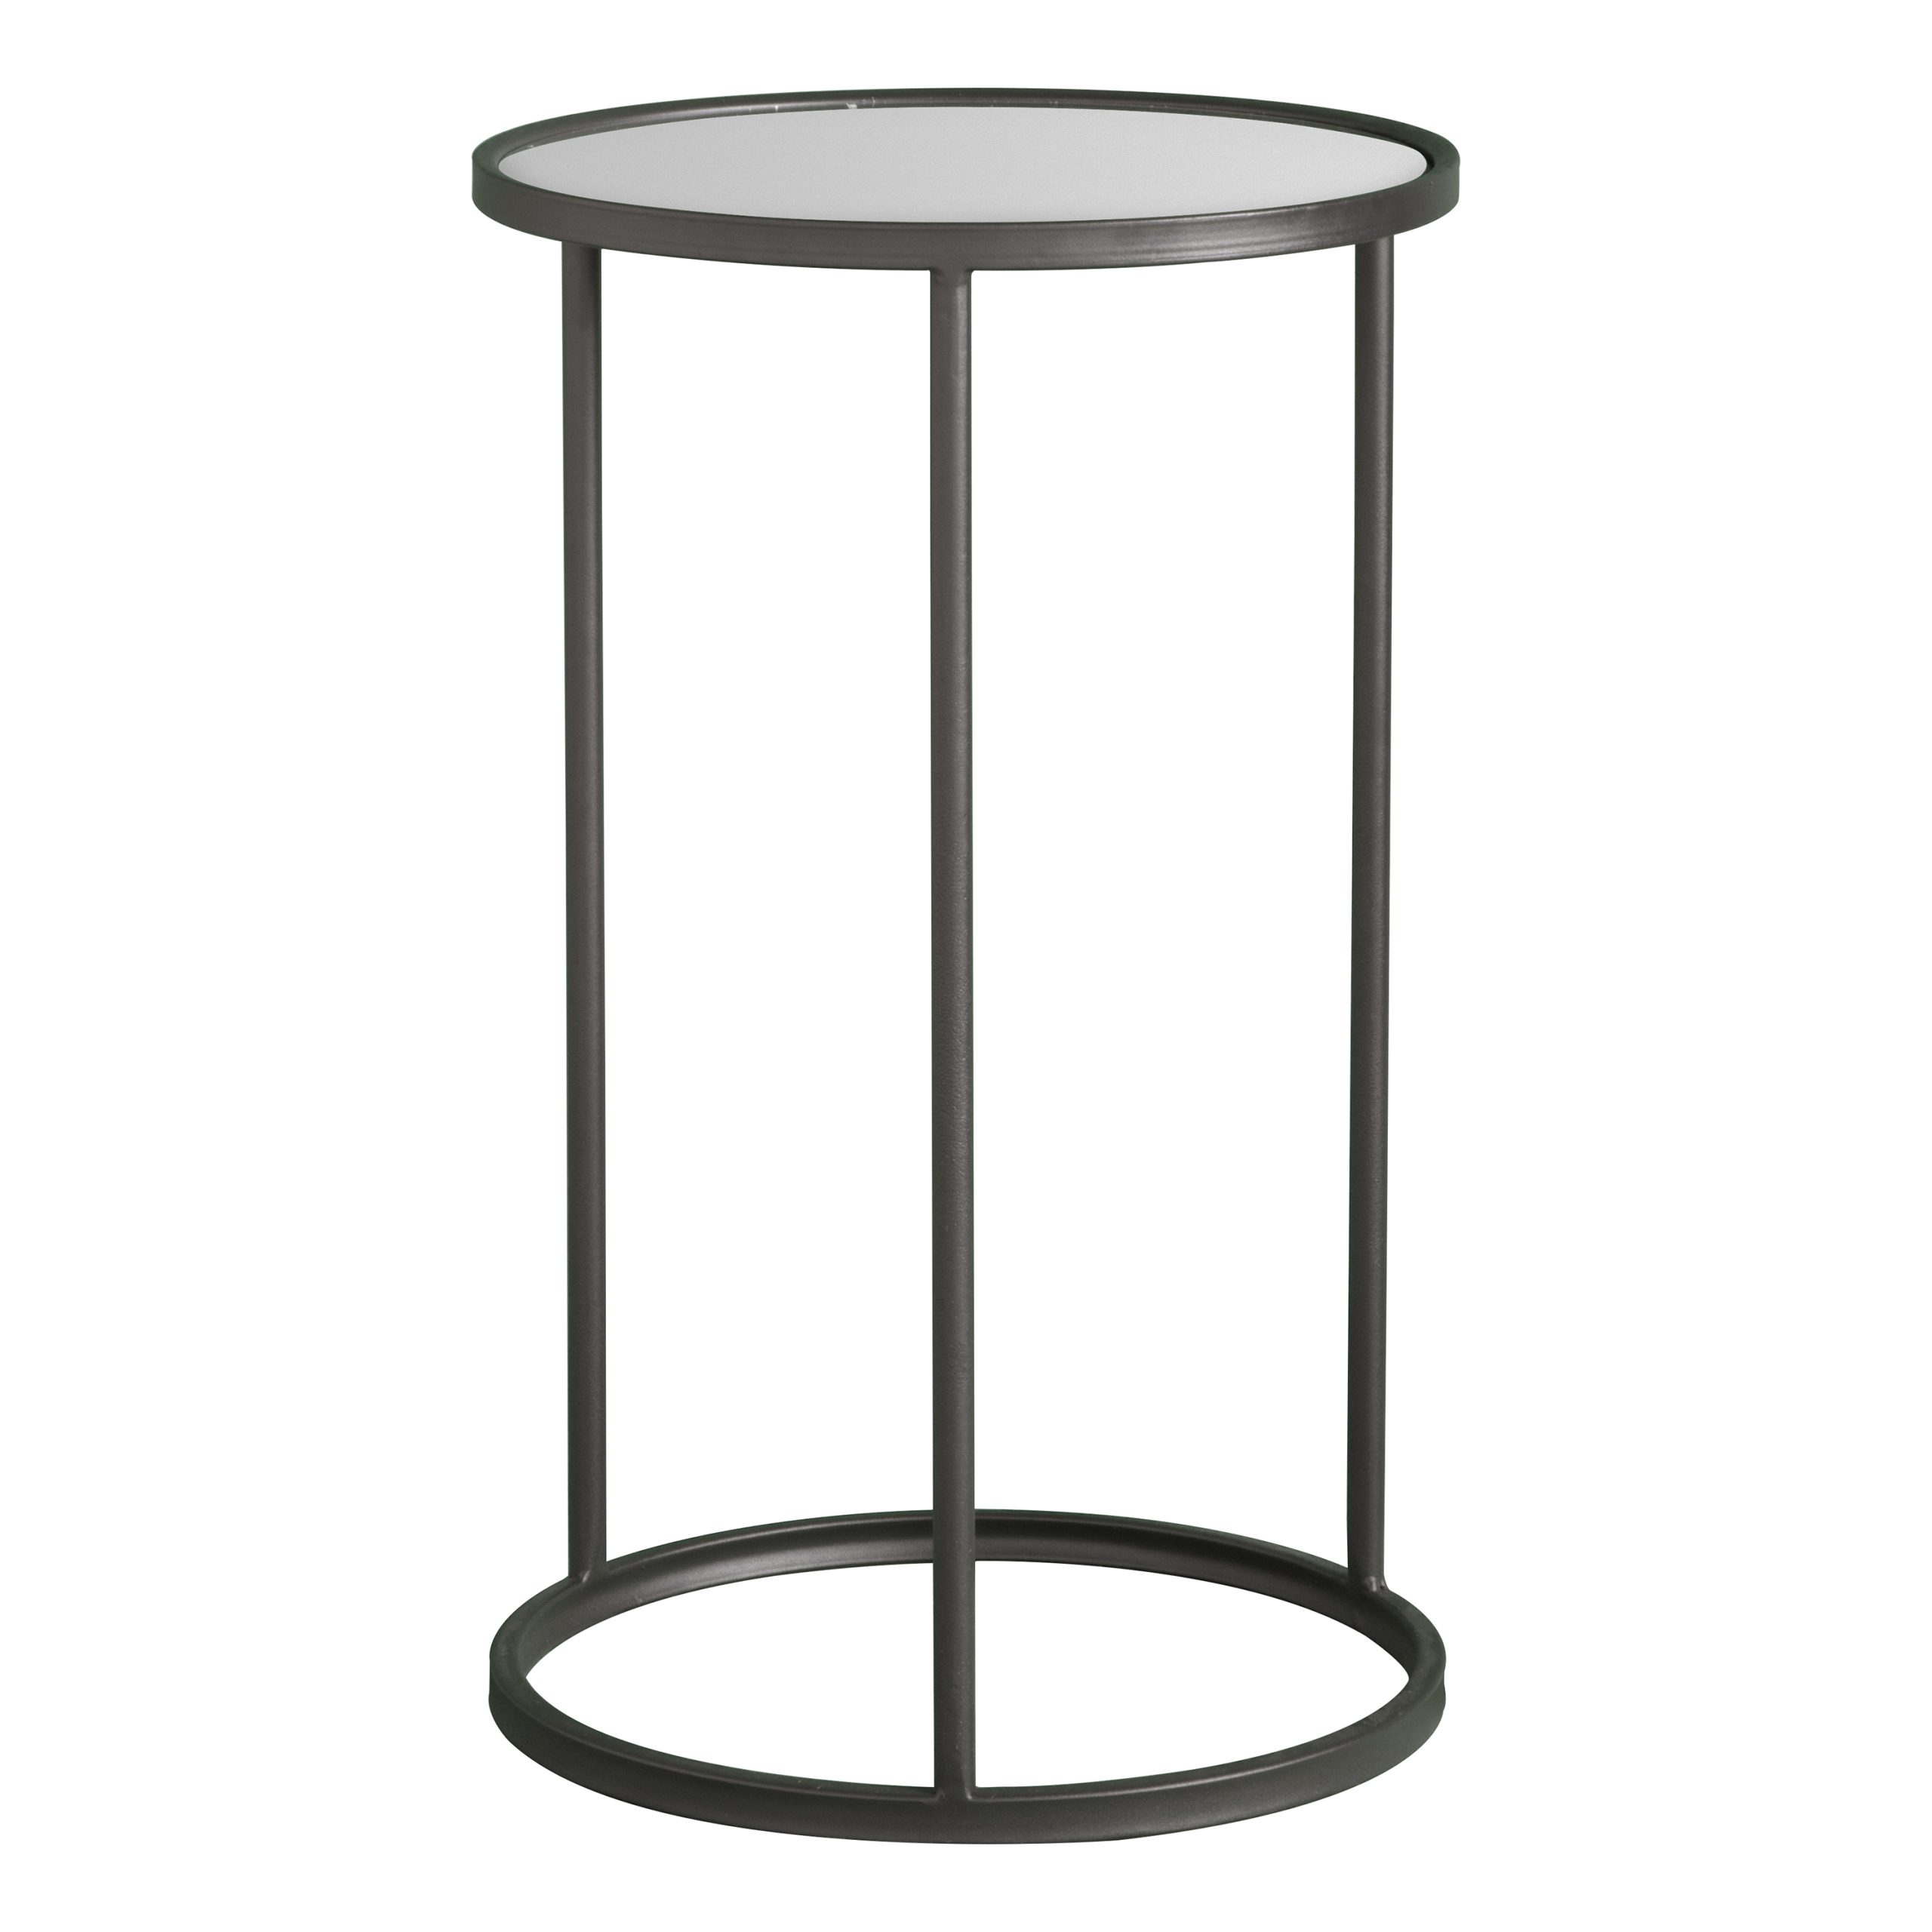 Gallery Direct Hutton Side Table